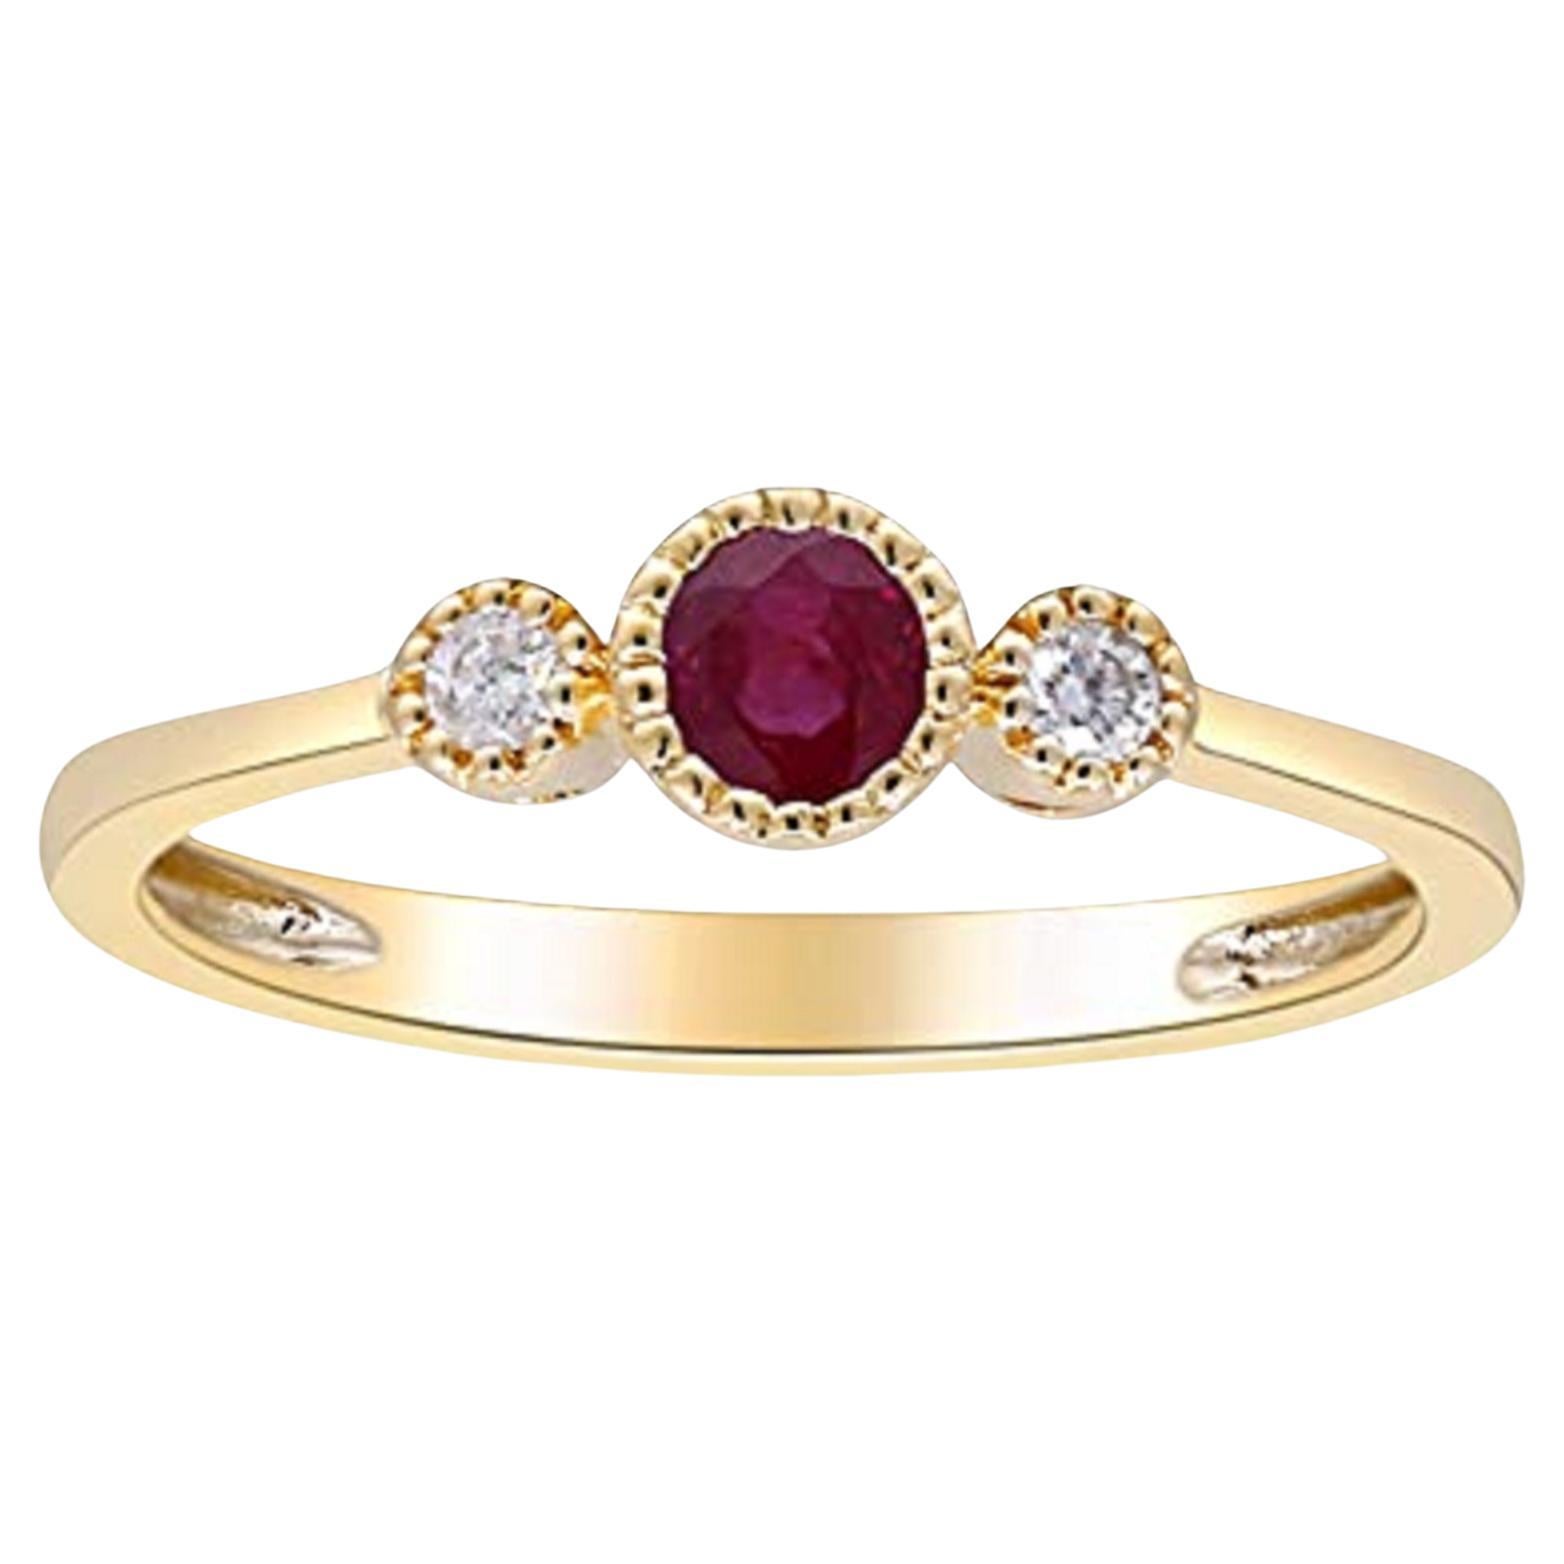  Gin & Grace 10K Yellow Gold Mozambique Ruby Ring with Diamonds for women For Sale